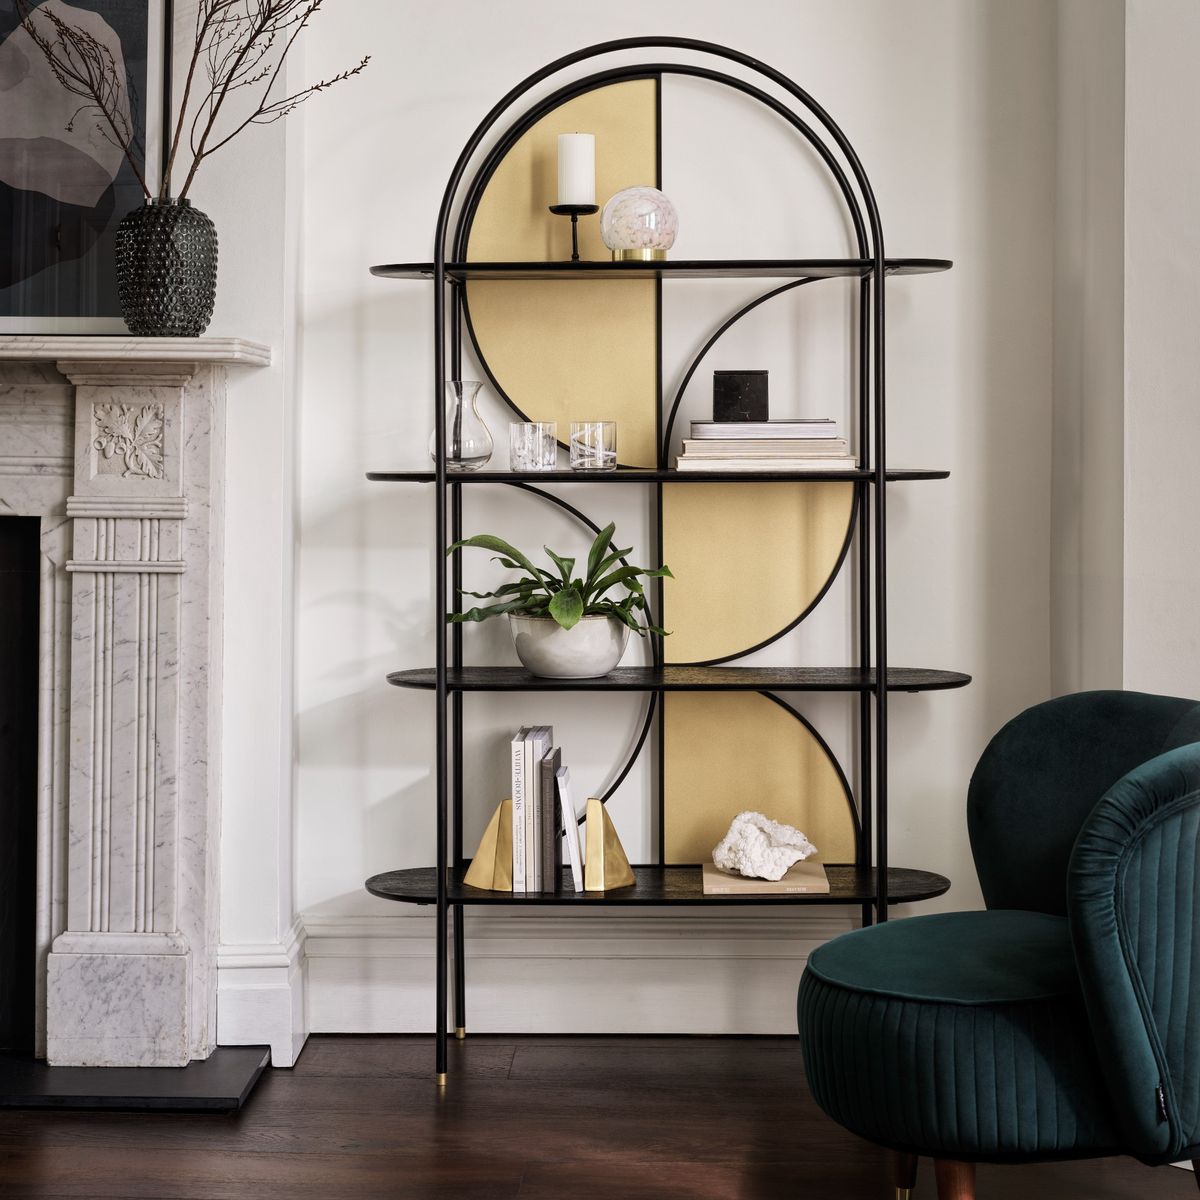  M&S just launched a special furniture collab – and we’re swooning over this bookshelf in all of its art deco glory 